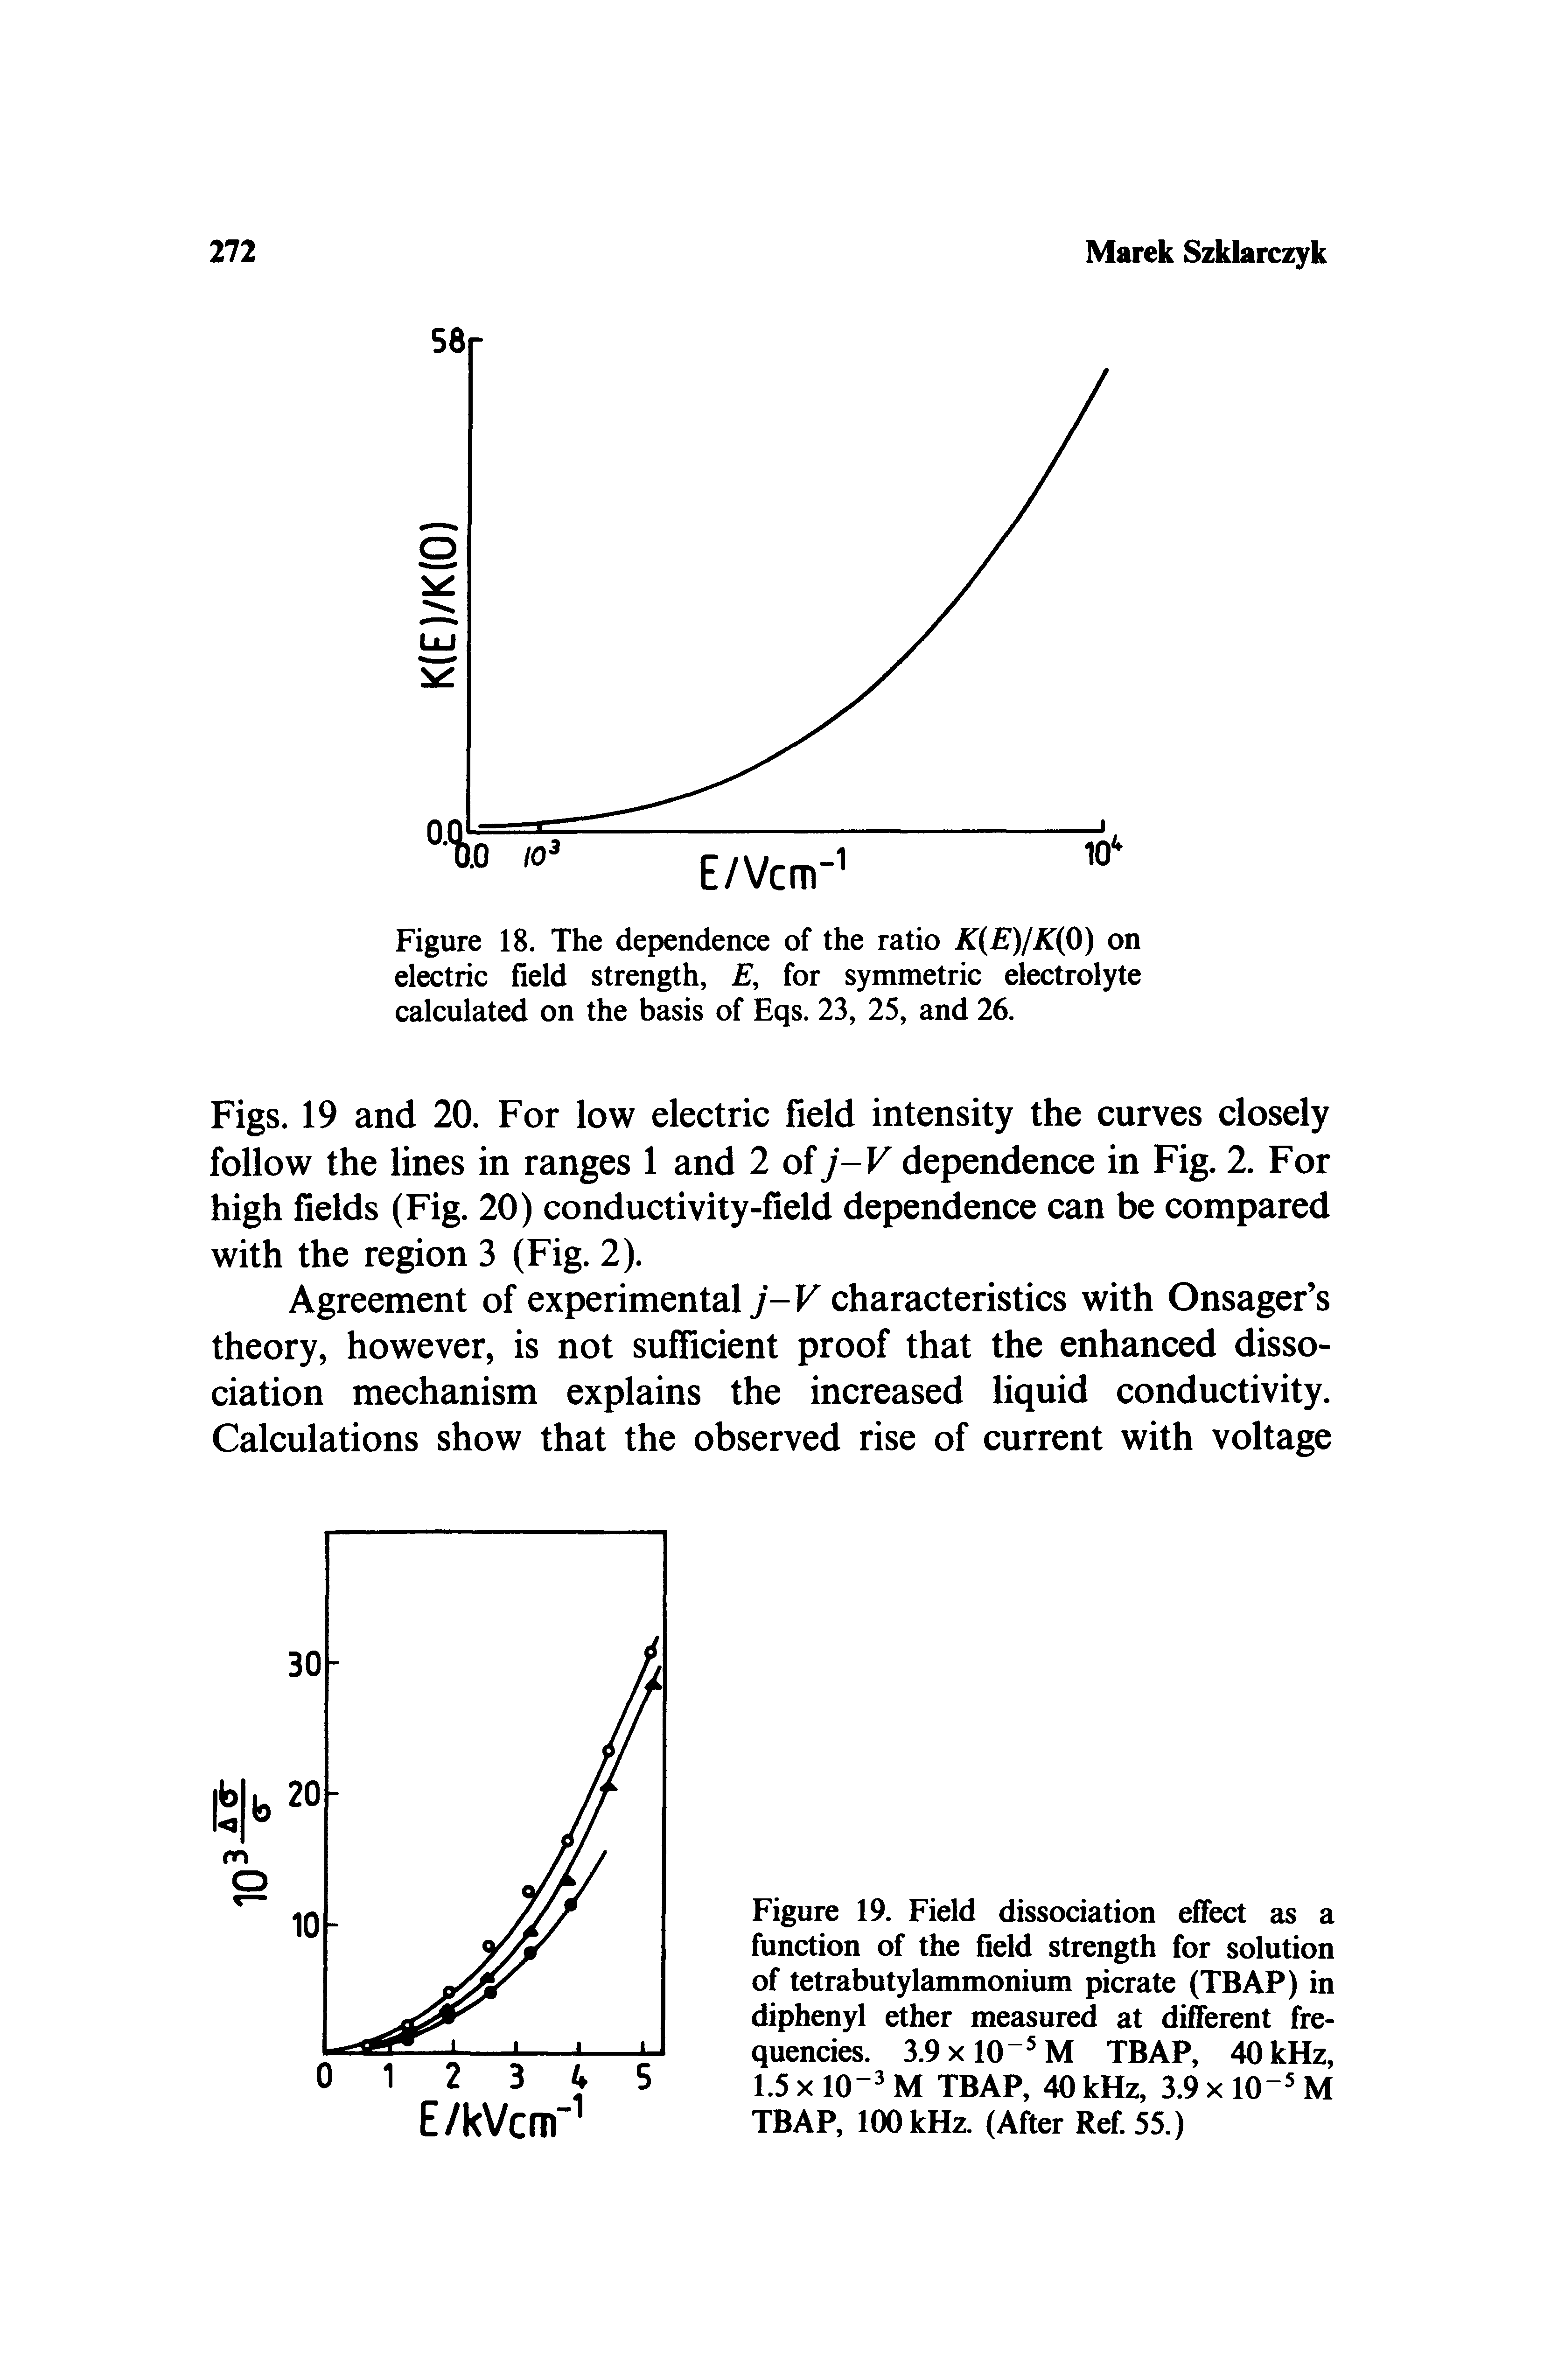 Figure 19. Field dissociation effect as a function of the field strength for solution of tetrabutylammonium picrate (TBAP) in diphenyl ether measured at different frequencies. 3.9xl0 M TBAP, 40 kHz, 1.5 X 10" M TBAP, 40 kHz, 3.9 x 10" M TBAP, 100 kHz. (After Ref. 55.)...